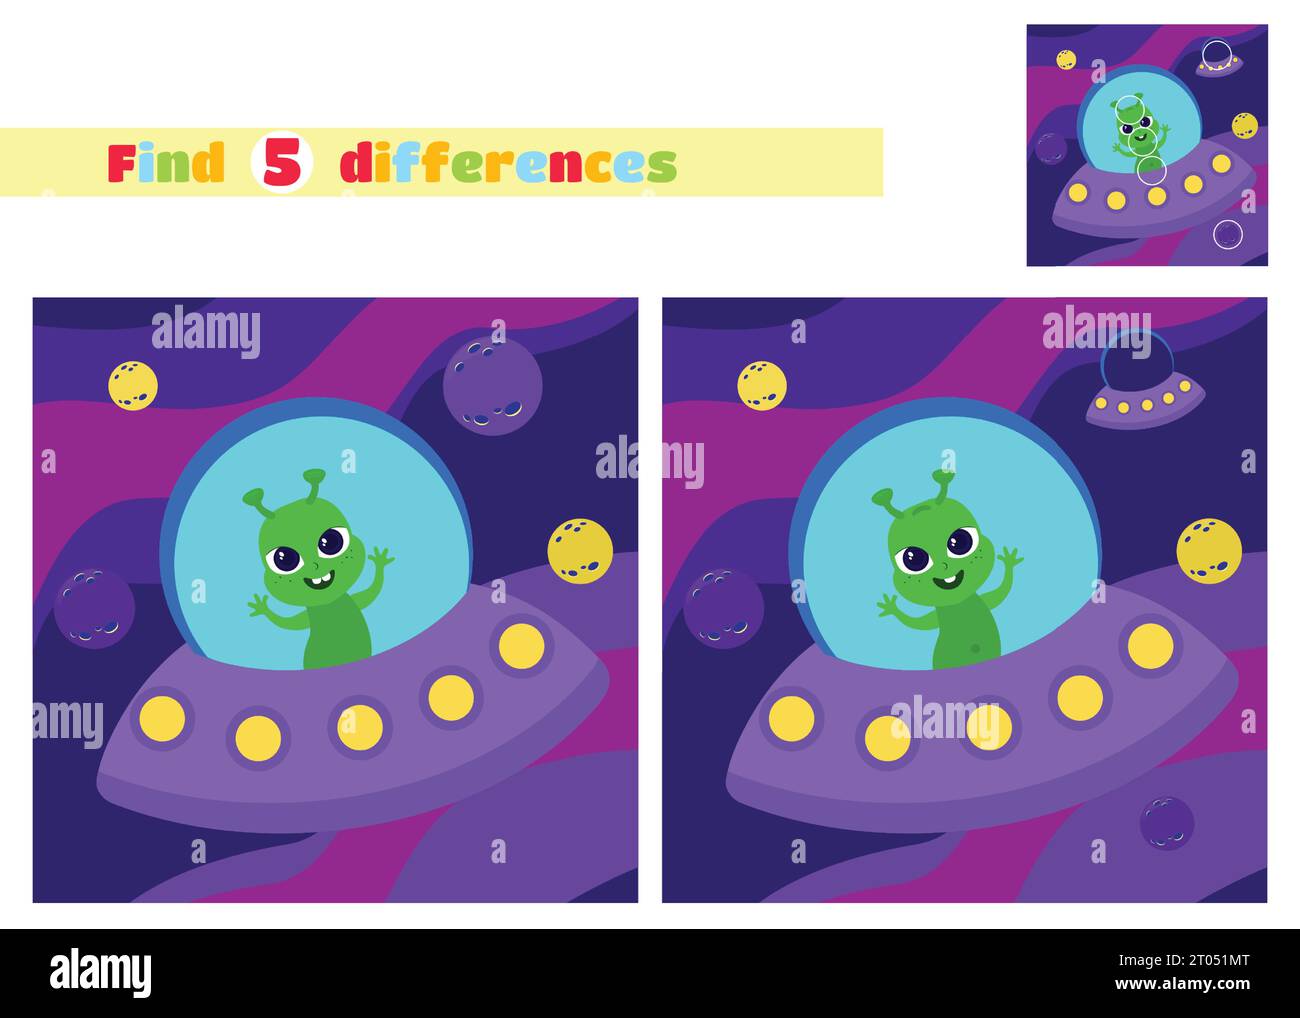 Find the differences. A small friendly alien inside a flying saucer in a cartoon style. An educational game for children in elementary school. Stock Vector